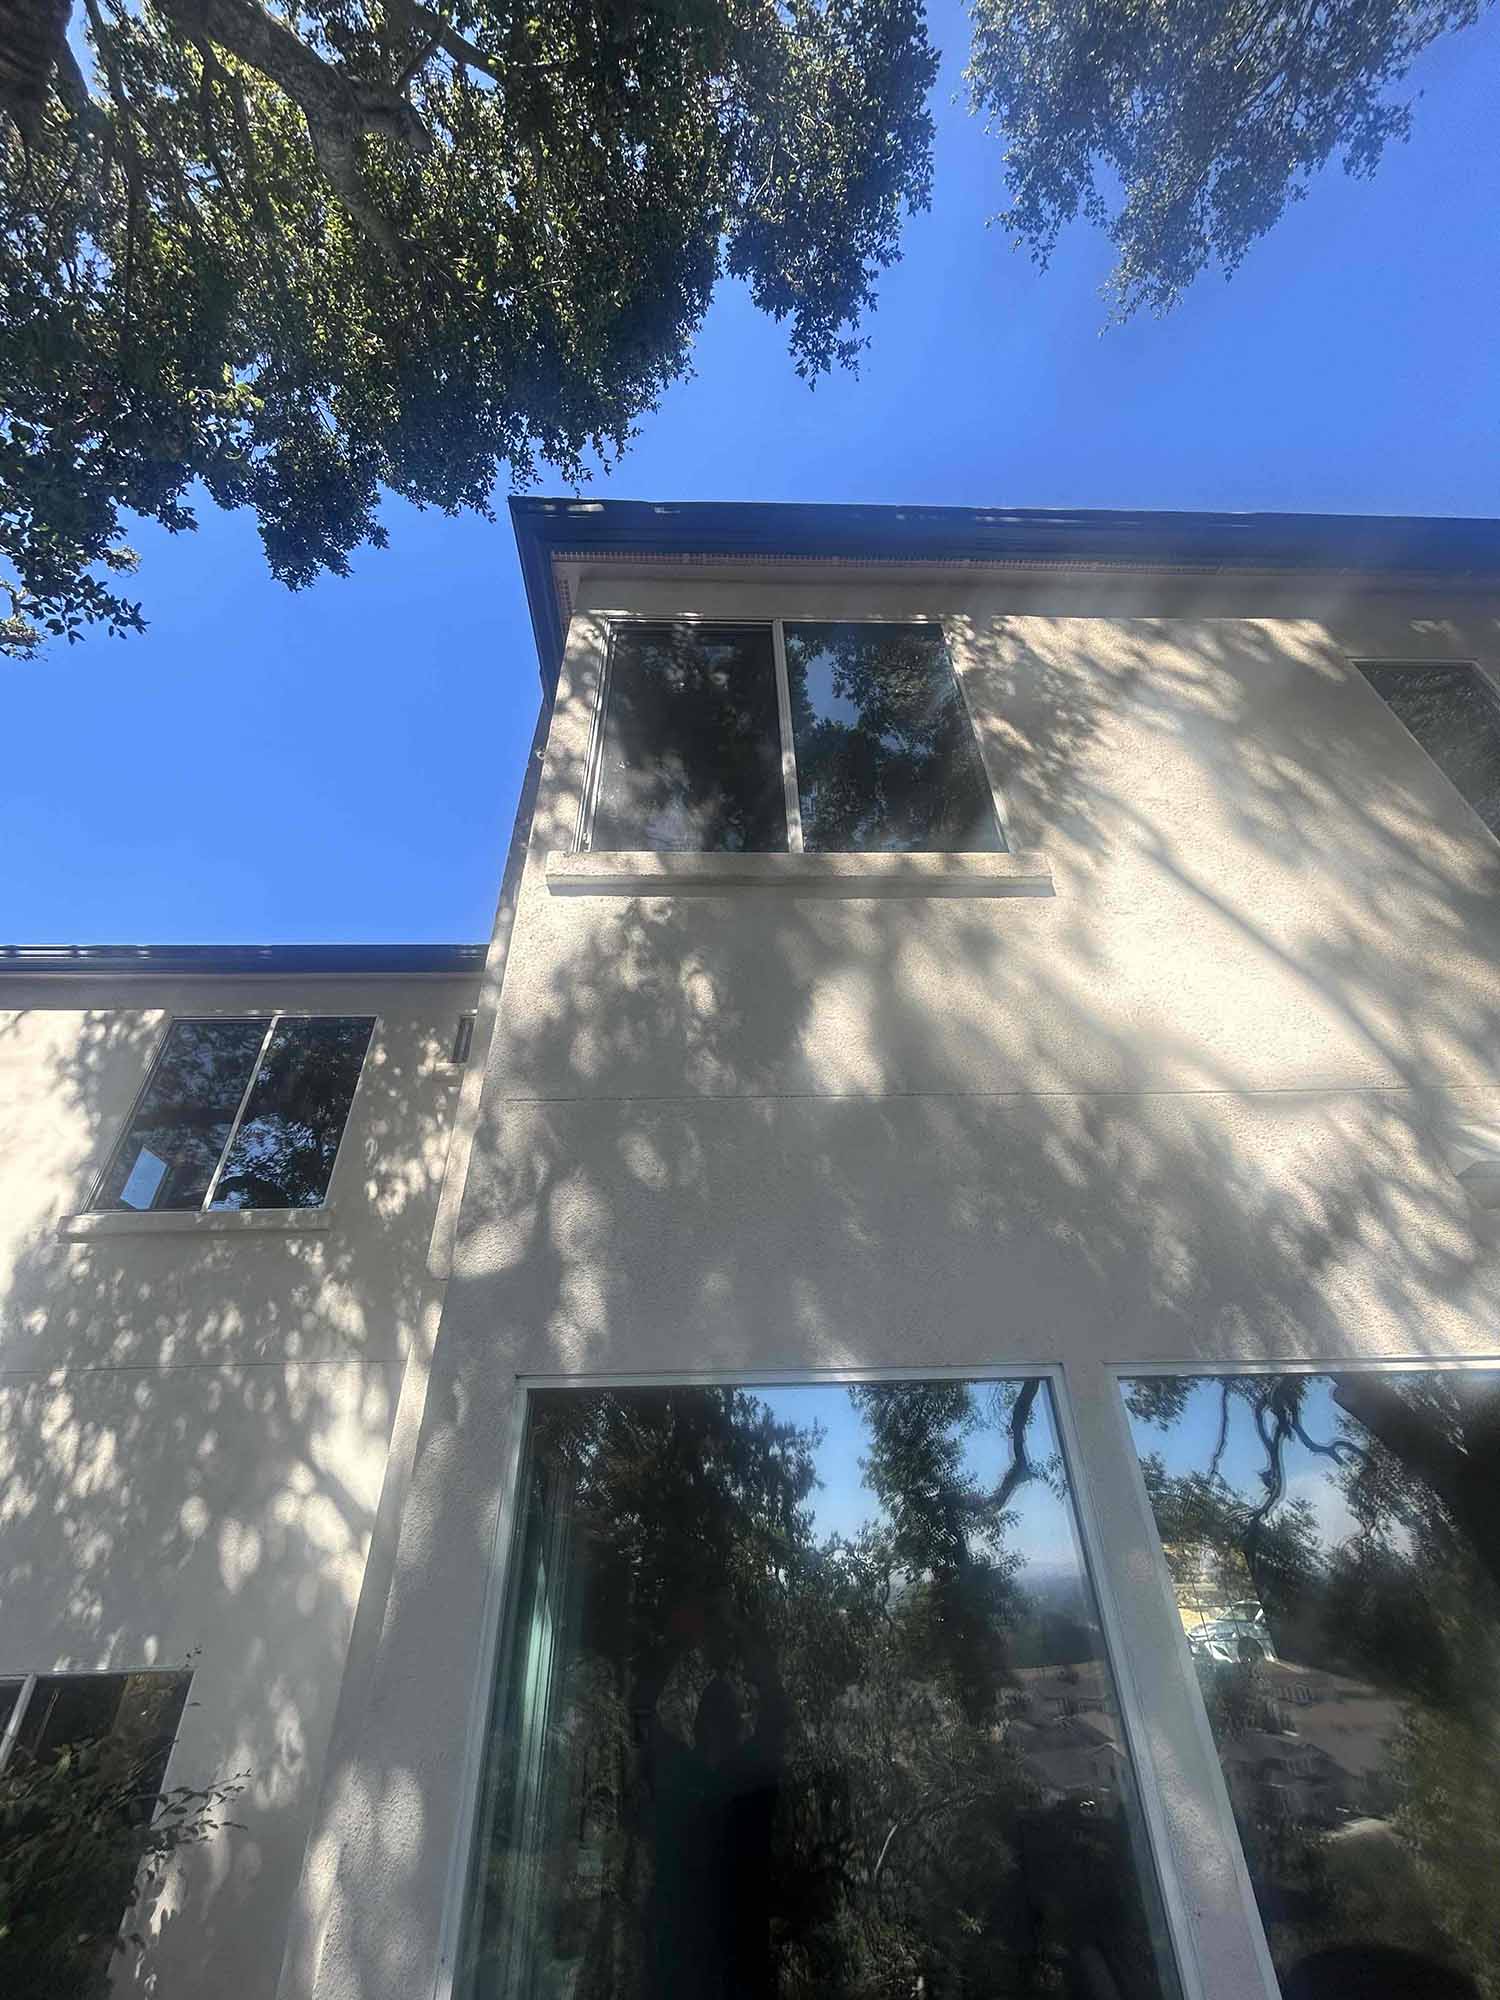 Sun and Heat Control Window Film for Santa Rosa, CA Homes, installed by ClimatePro.